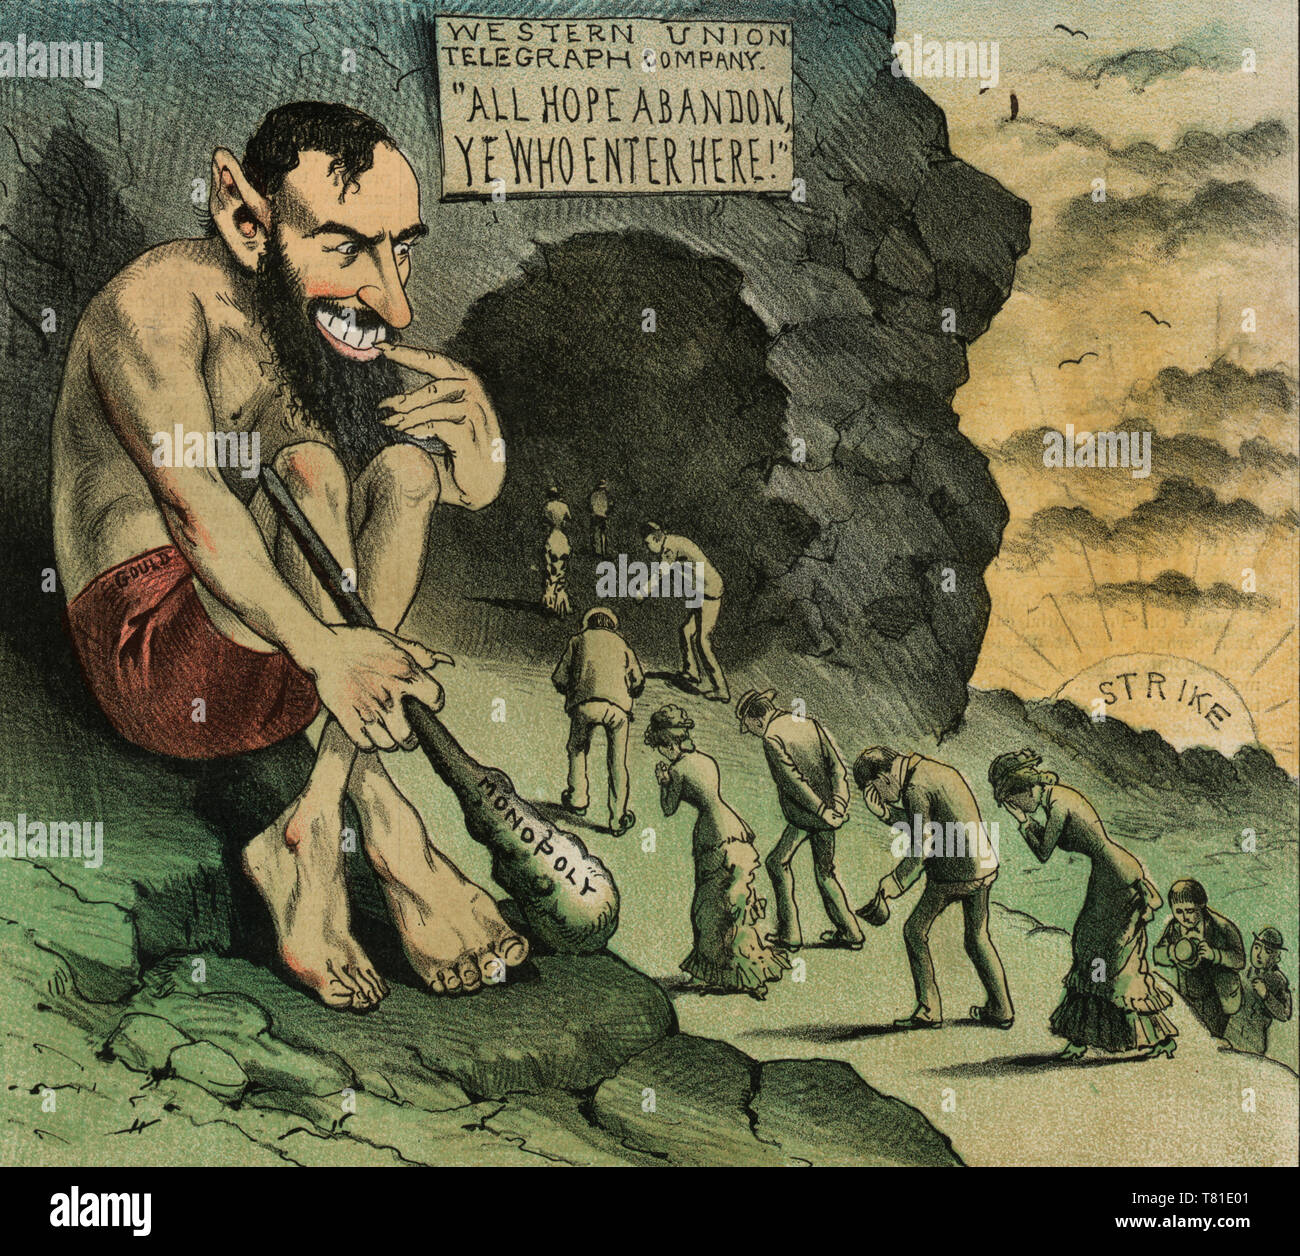 The cave of despair - Political cartoon shows Jay Gould as a giant holding a large club labeled 'Monopoly', sitting on rocks, gleefully watching a line of downtrodden people entering a cave labeled 'Western Union Telegraph Company - All Hope Abandon, Ye Who Enter Here'; on the horizon, the sun is labeled 'Strike'. 1883 Stock Photo